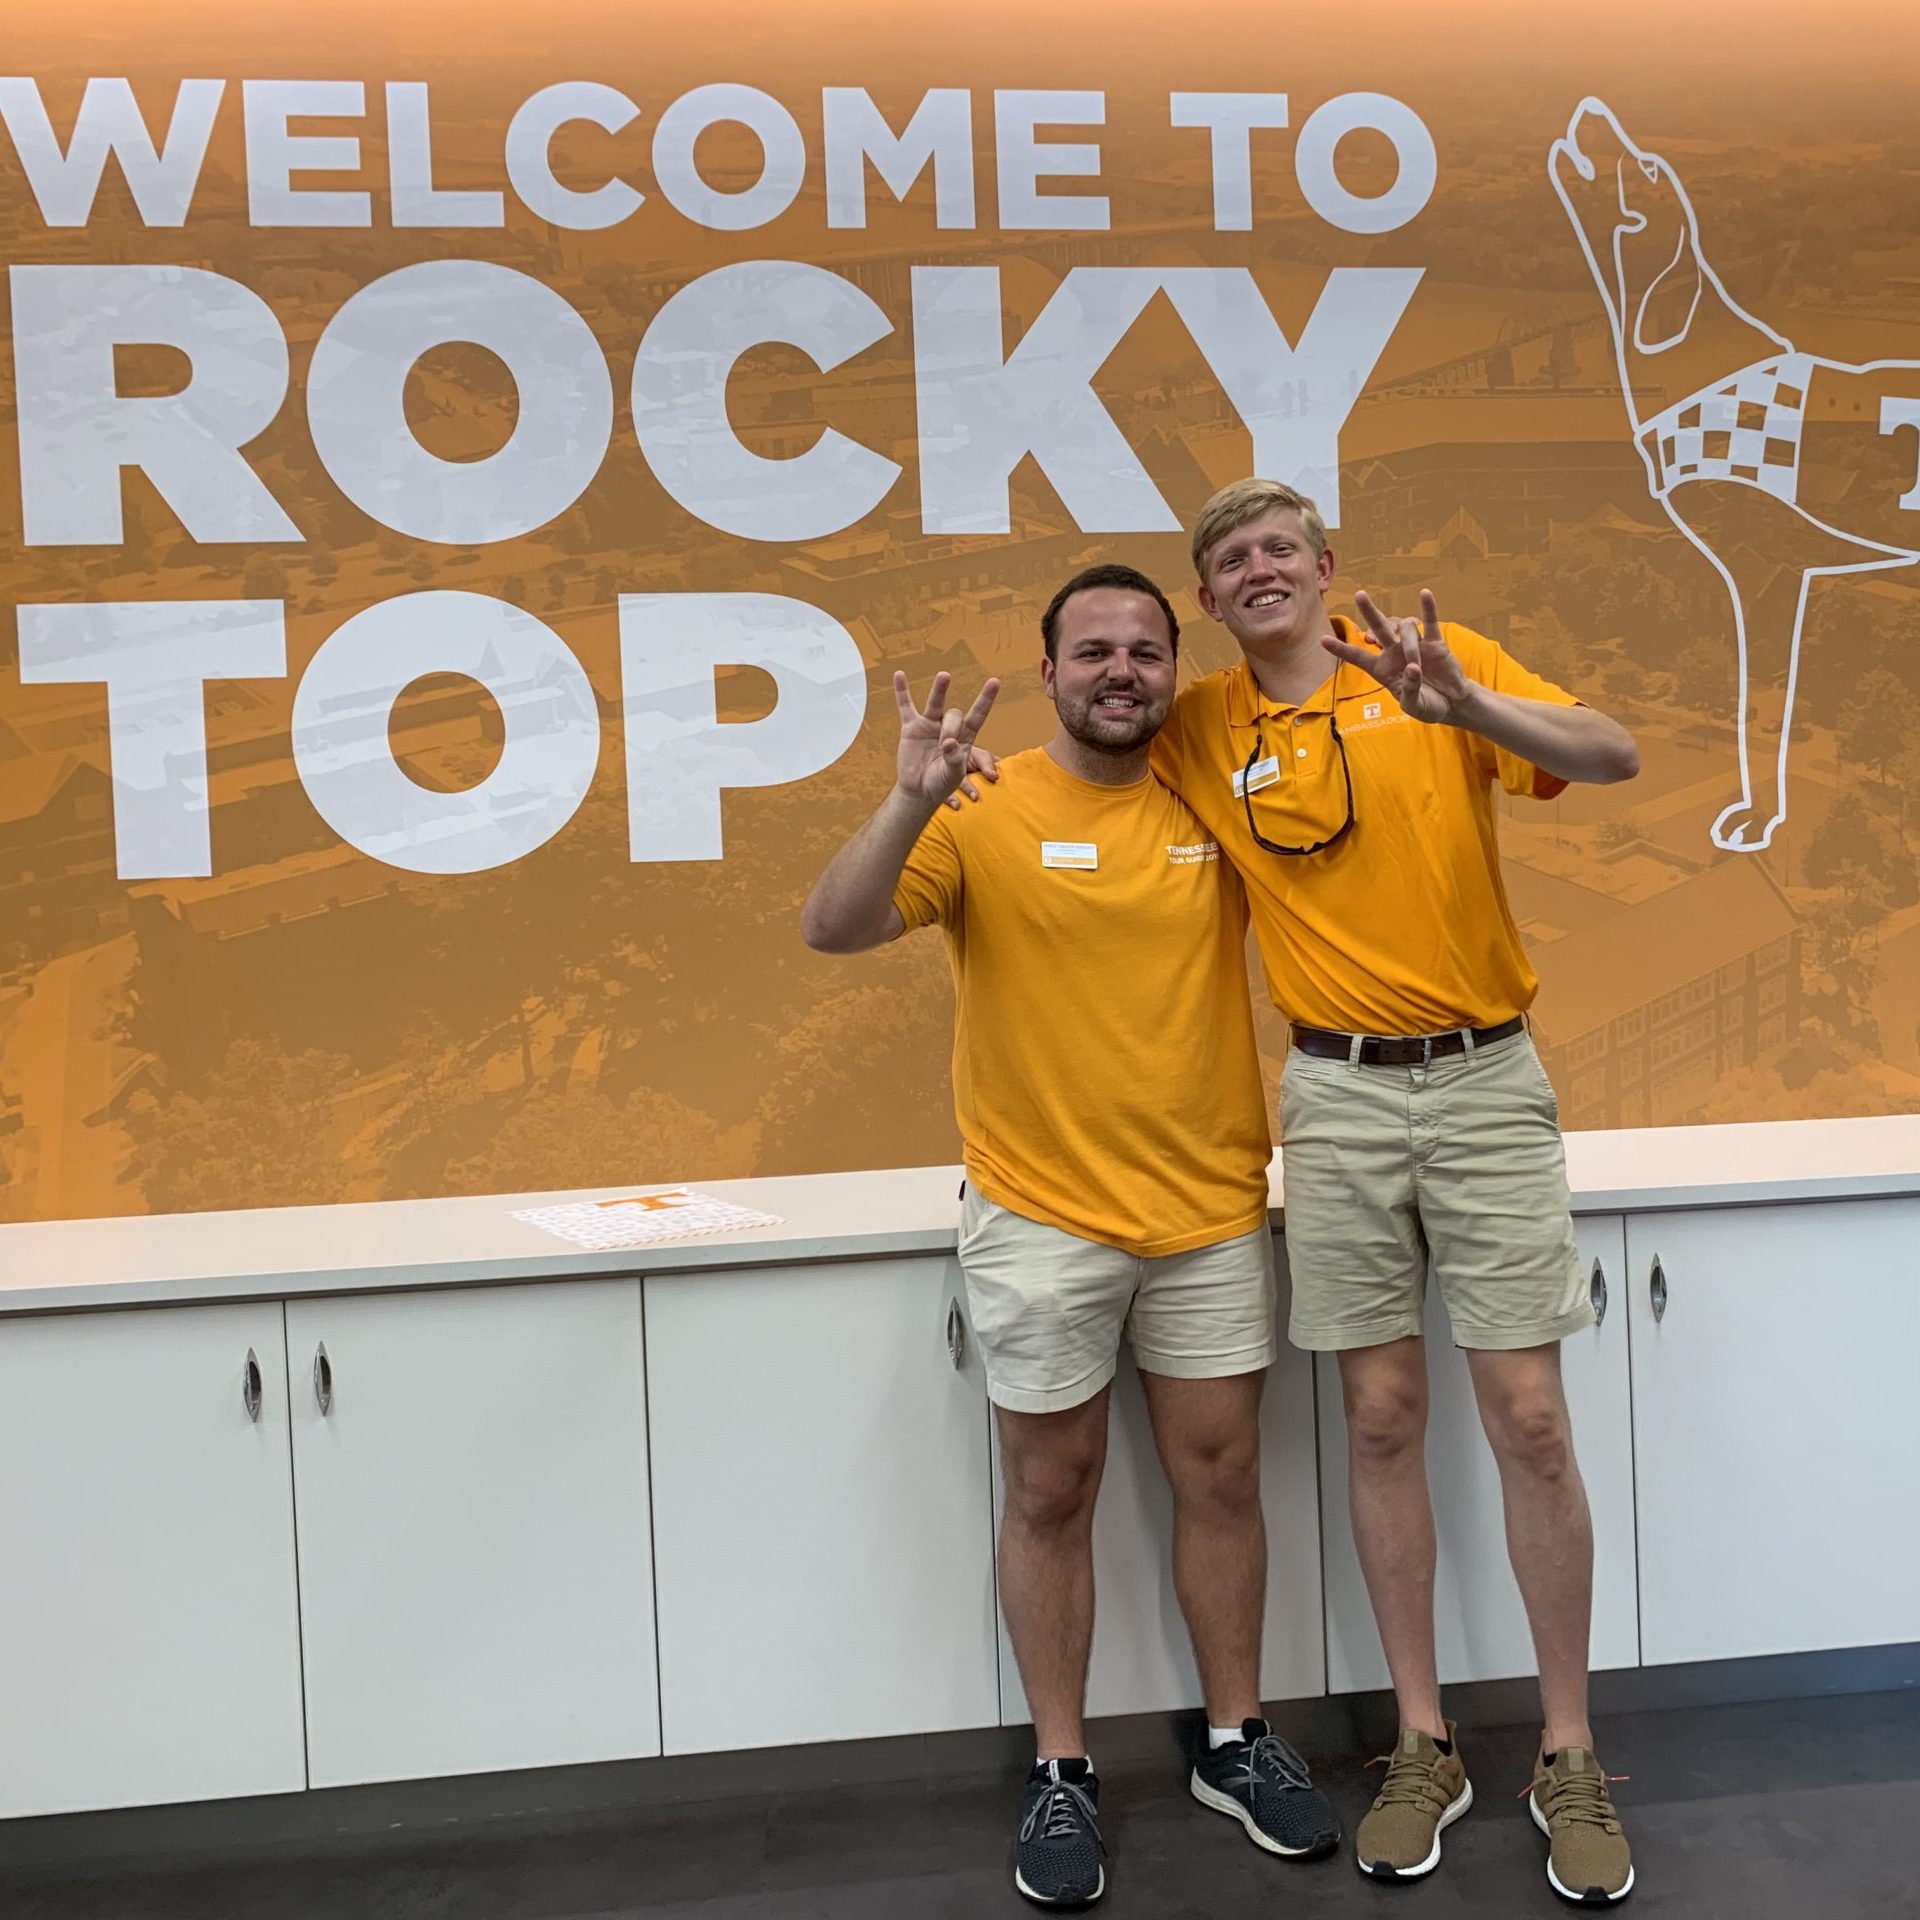 Students stand in front of "Welcome to Rocky Top" sign 